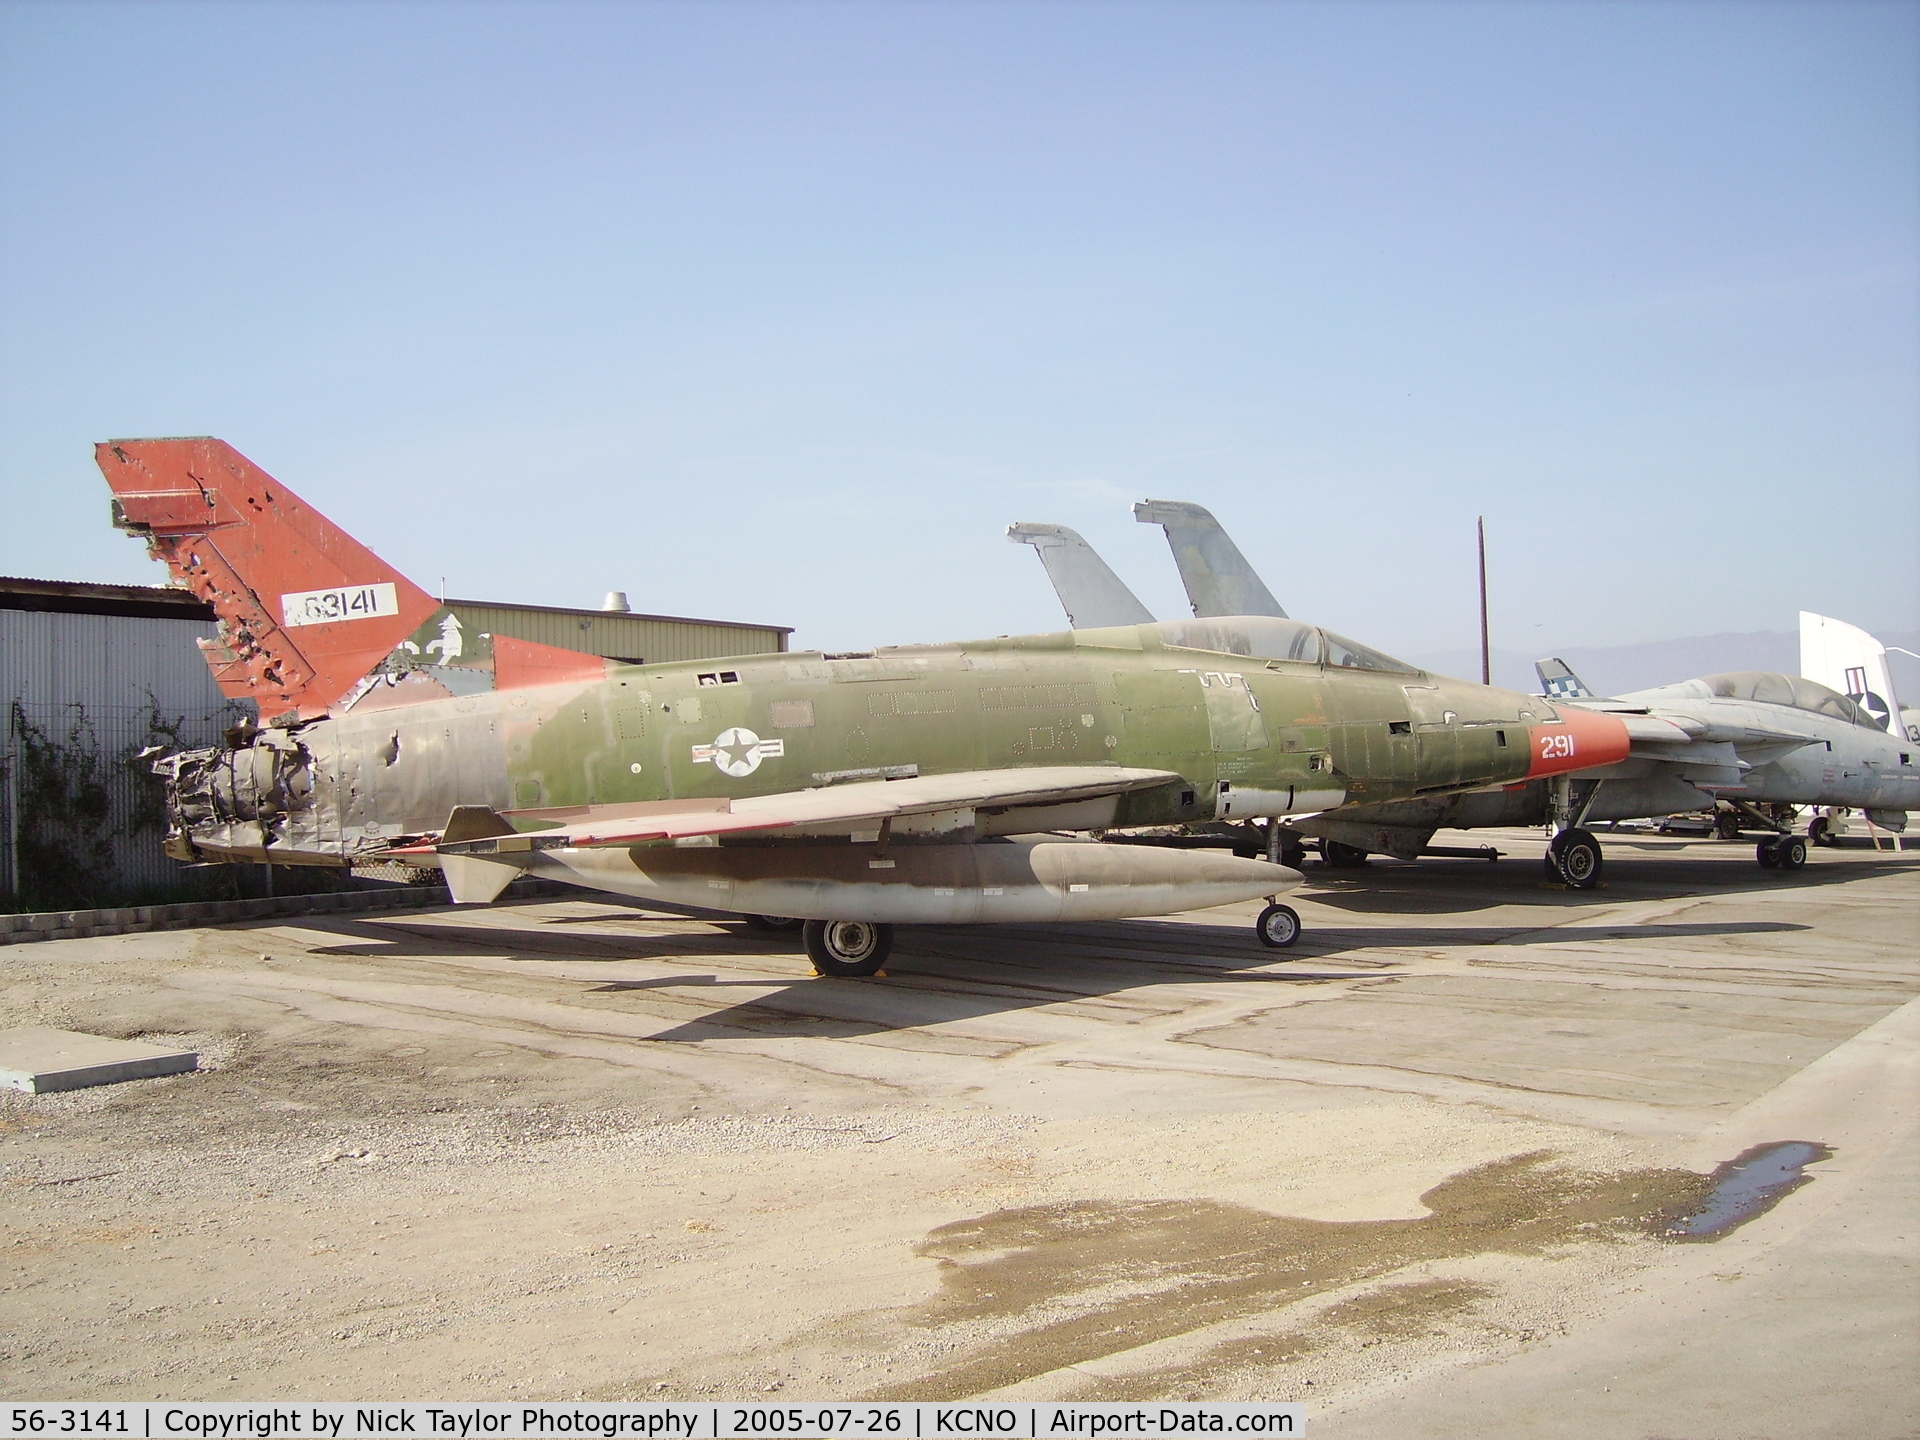 56-3141, 1956 North American F-100D Super Sabre C/N 235-239, Sitting at the Chino Planes of Fame Museum